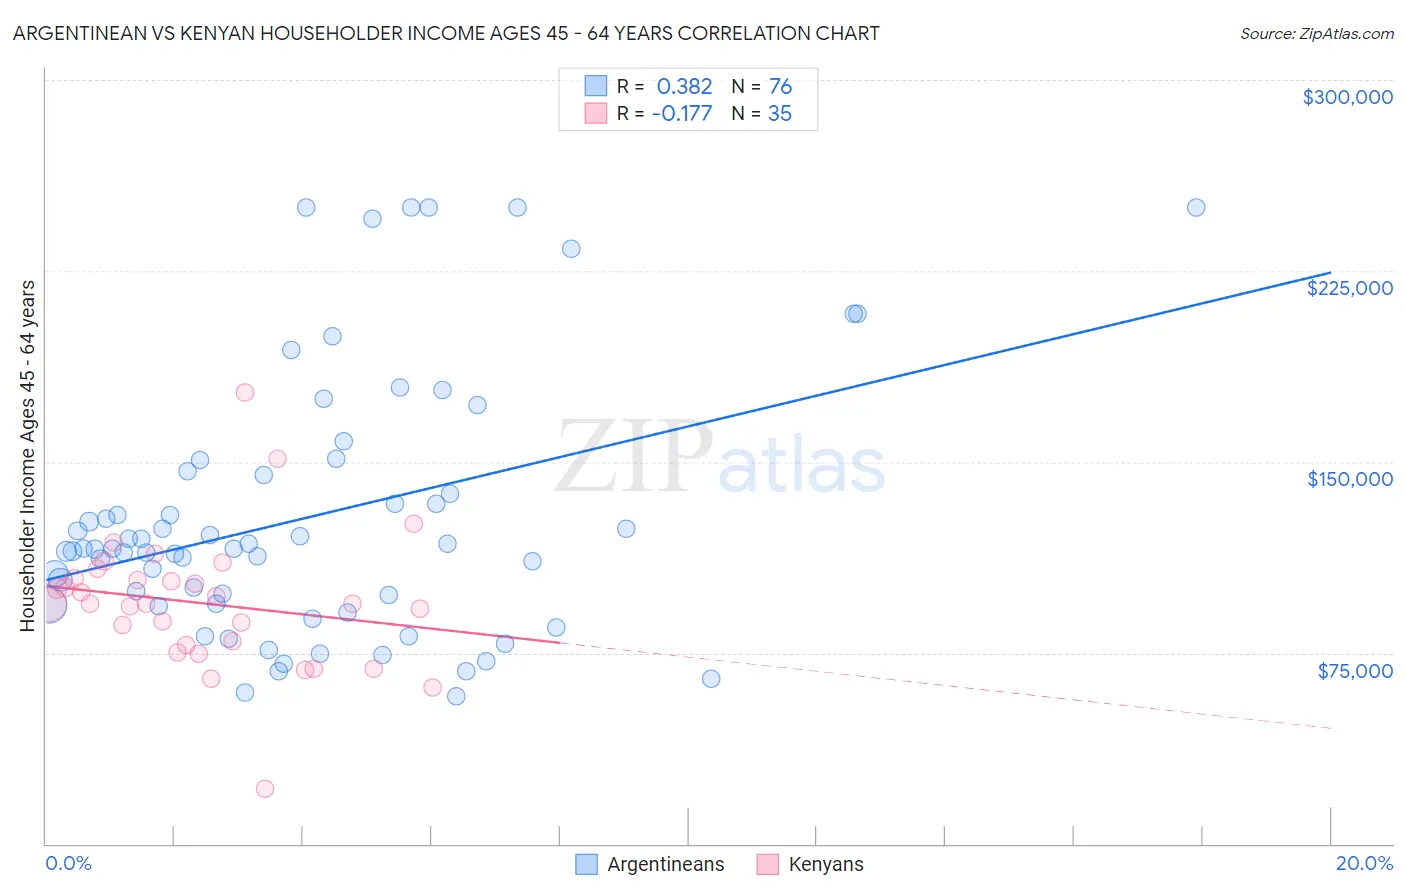 Argentinean vs Kenyan Householder Income Ages 45 - 64 years